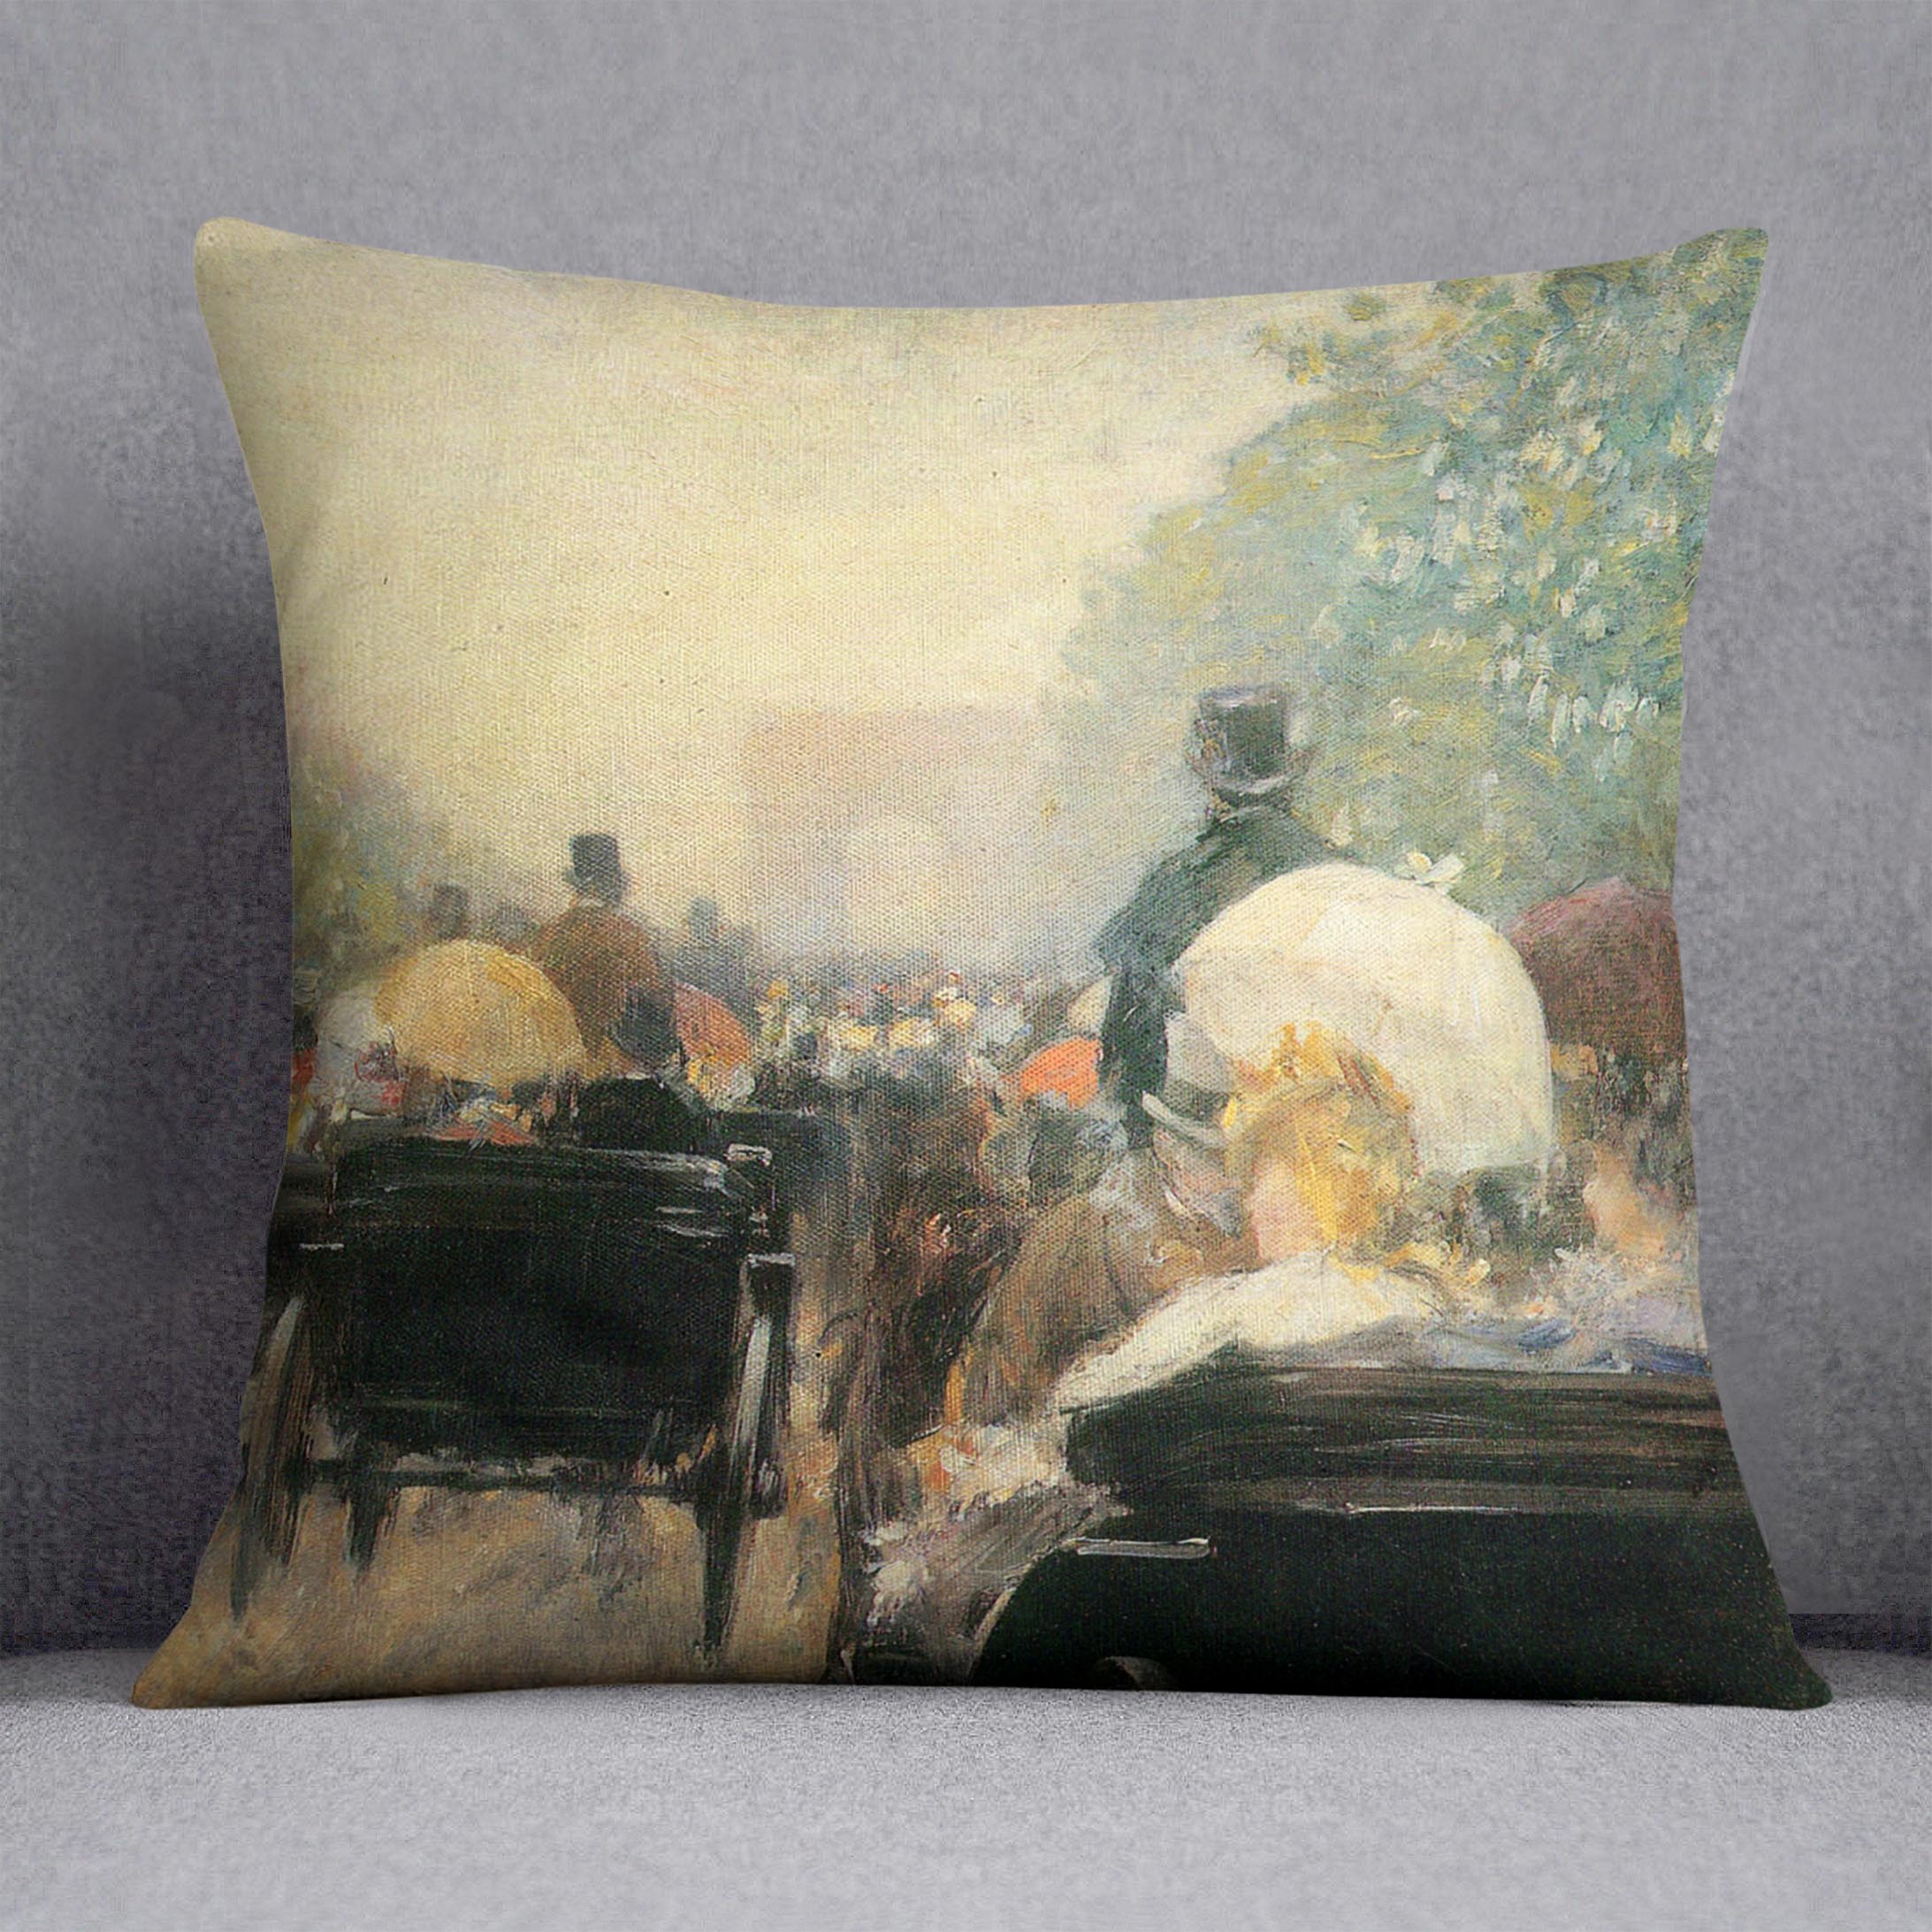 Carriage Parade by Hassam Cushion - Canvas Art Rocks - 1